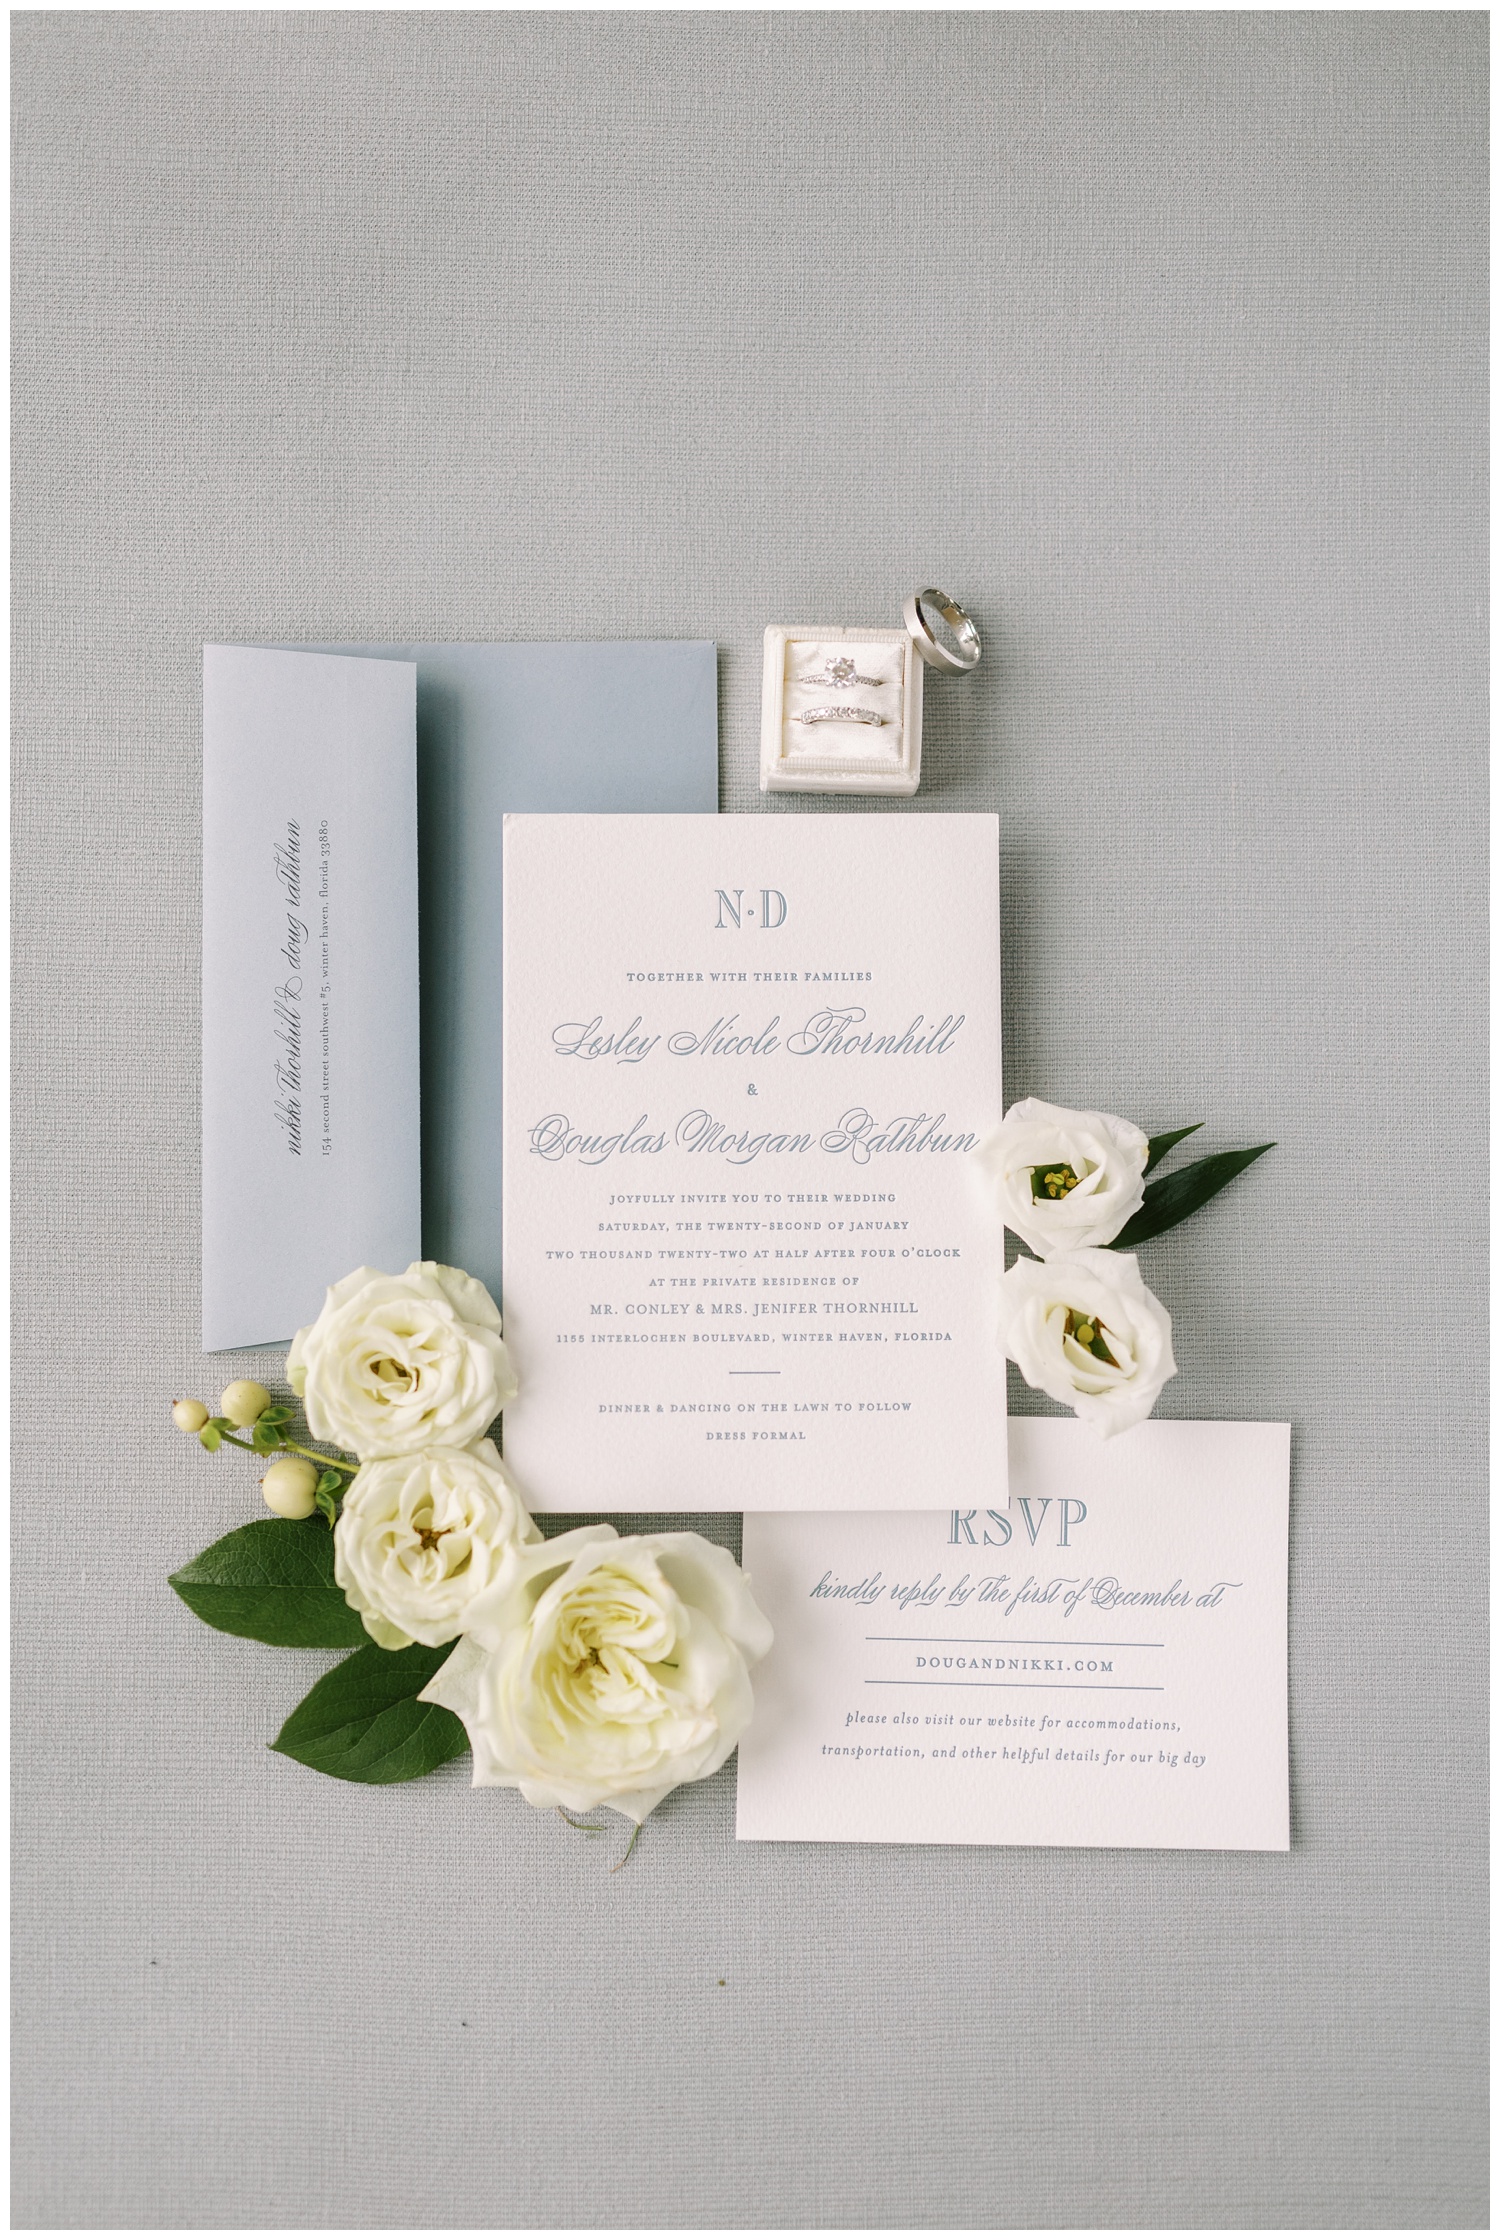 Minted wedding invitations with white flowers